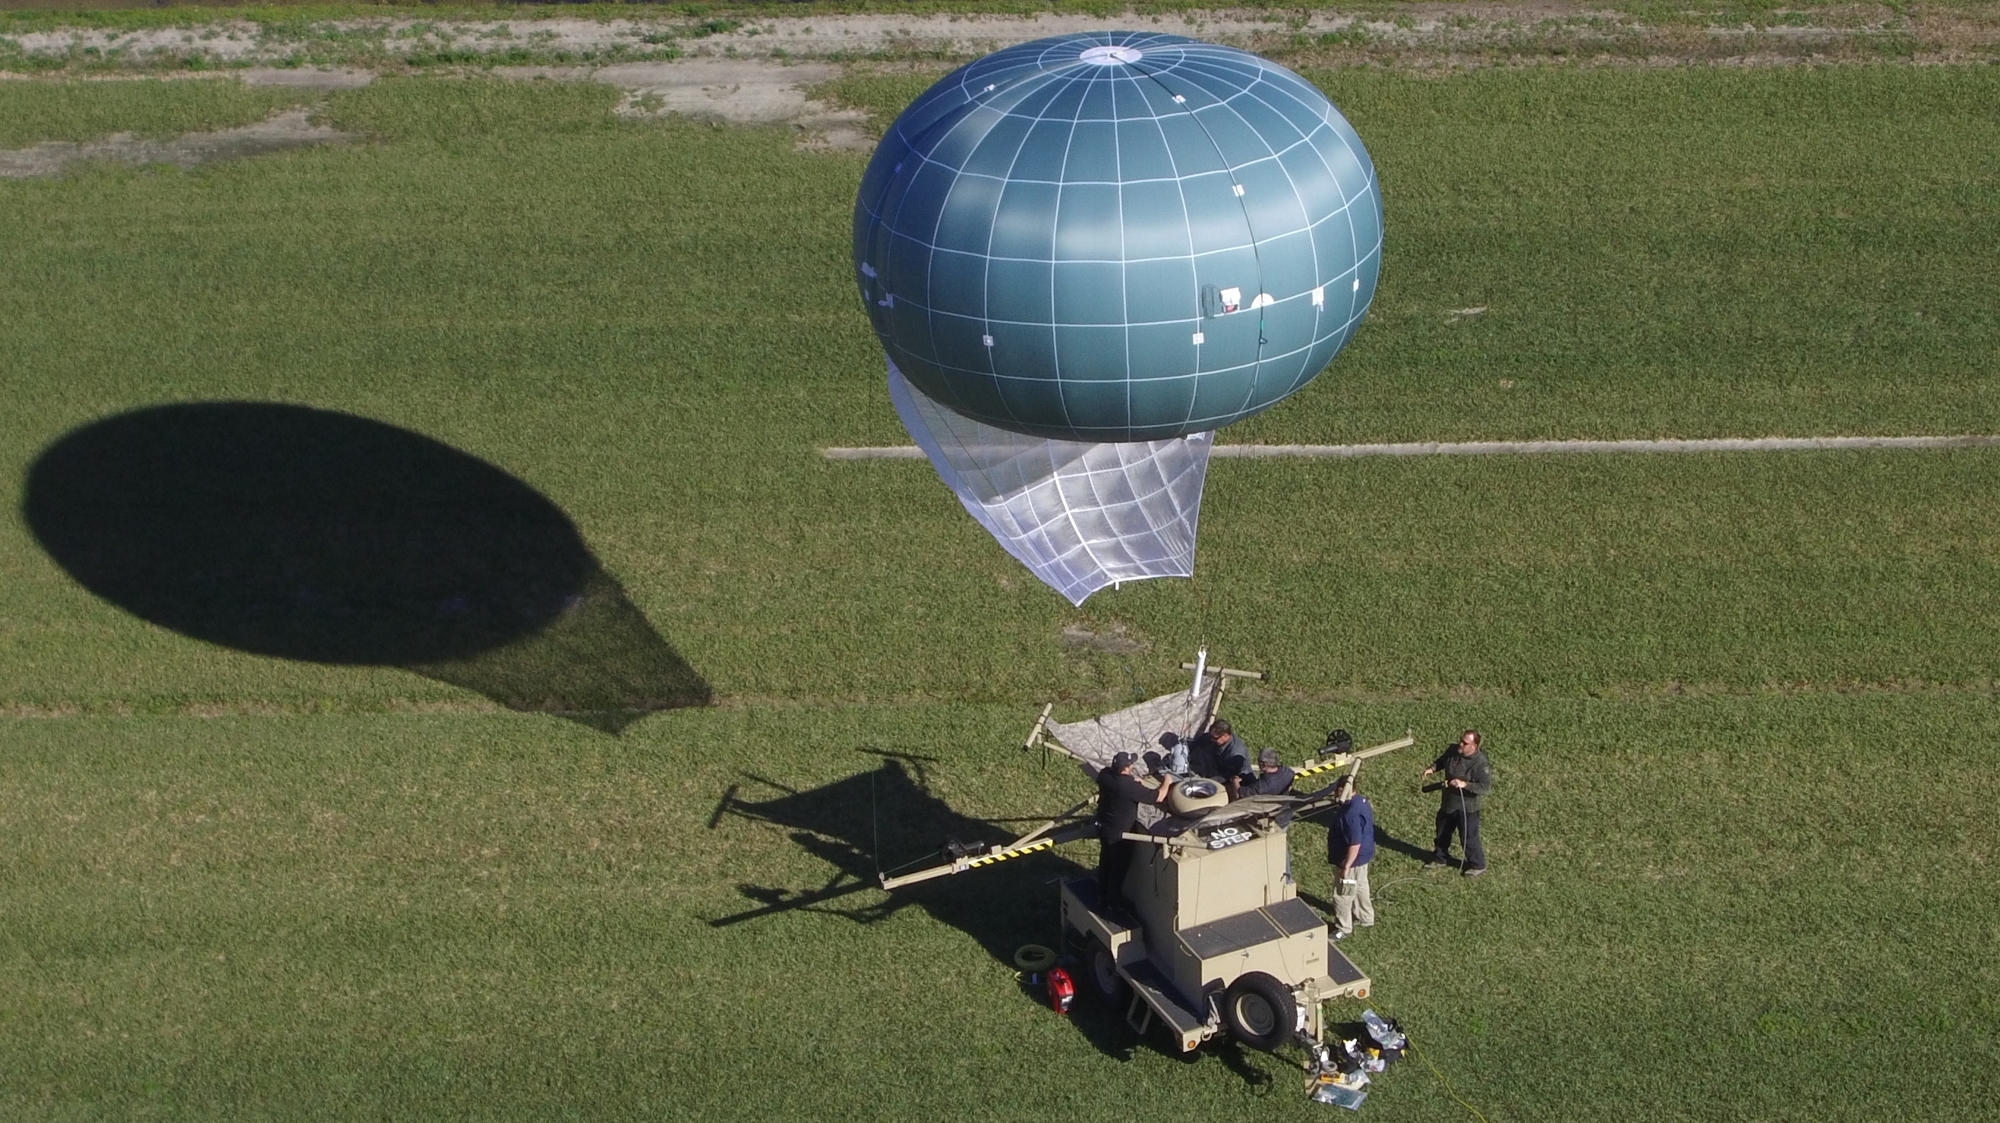 Drone Aviation’s Winch Aerostat Small Platform, or WASP, could be used to monitor the international borders.